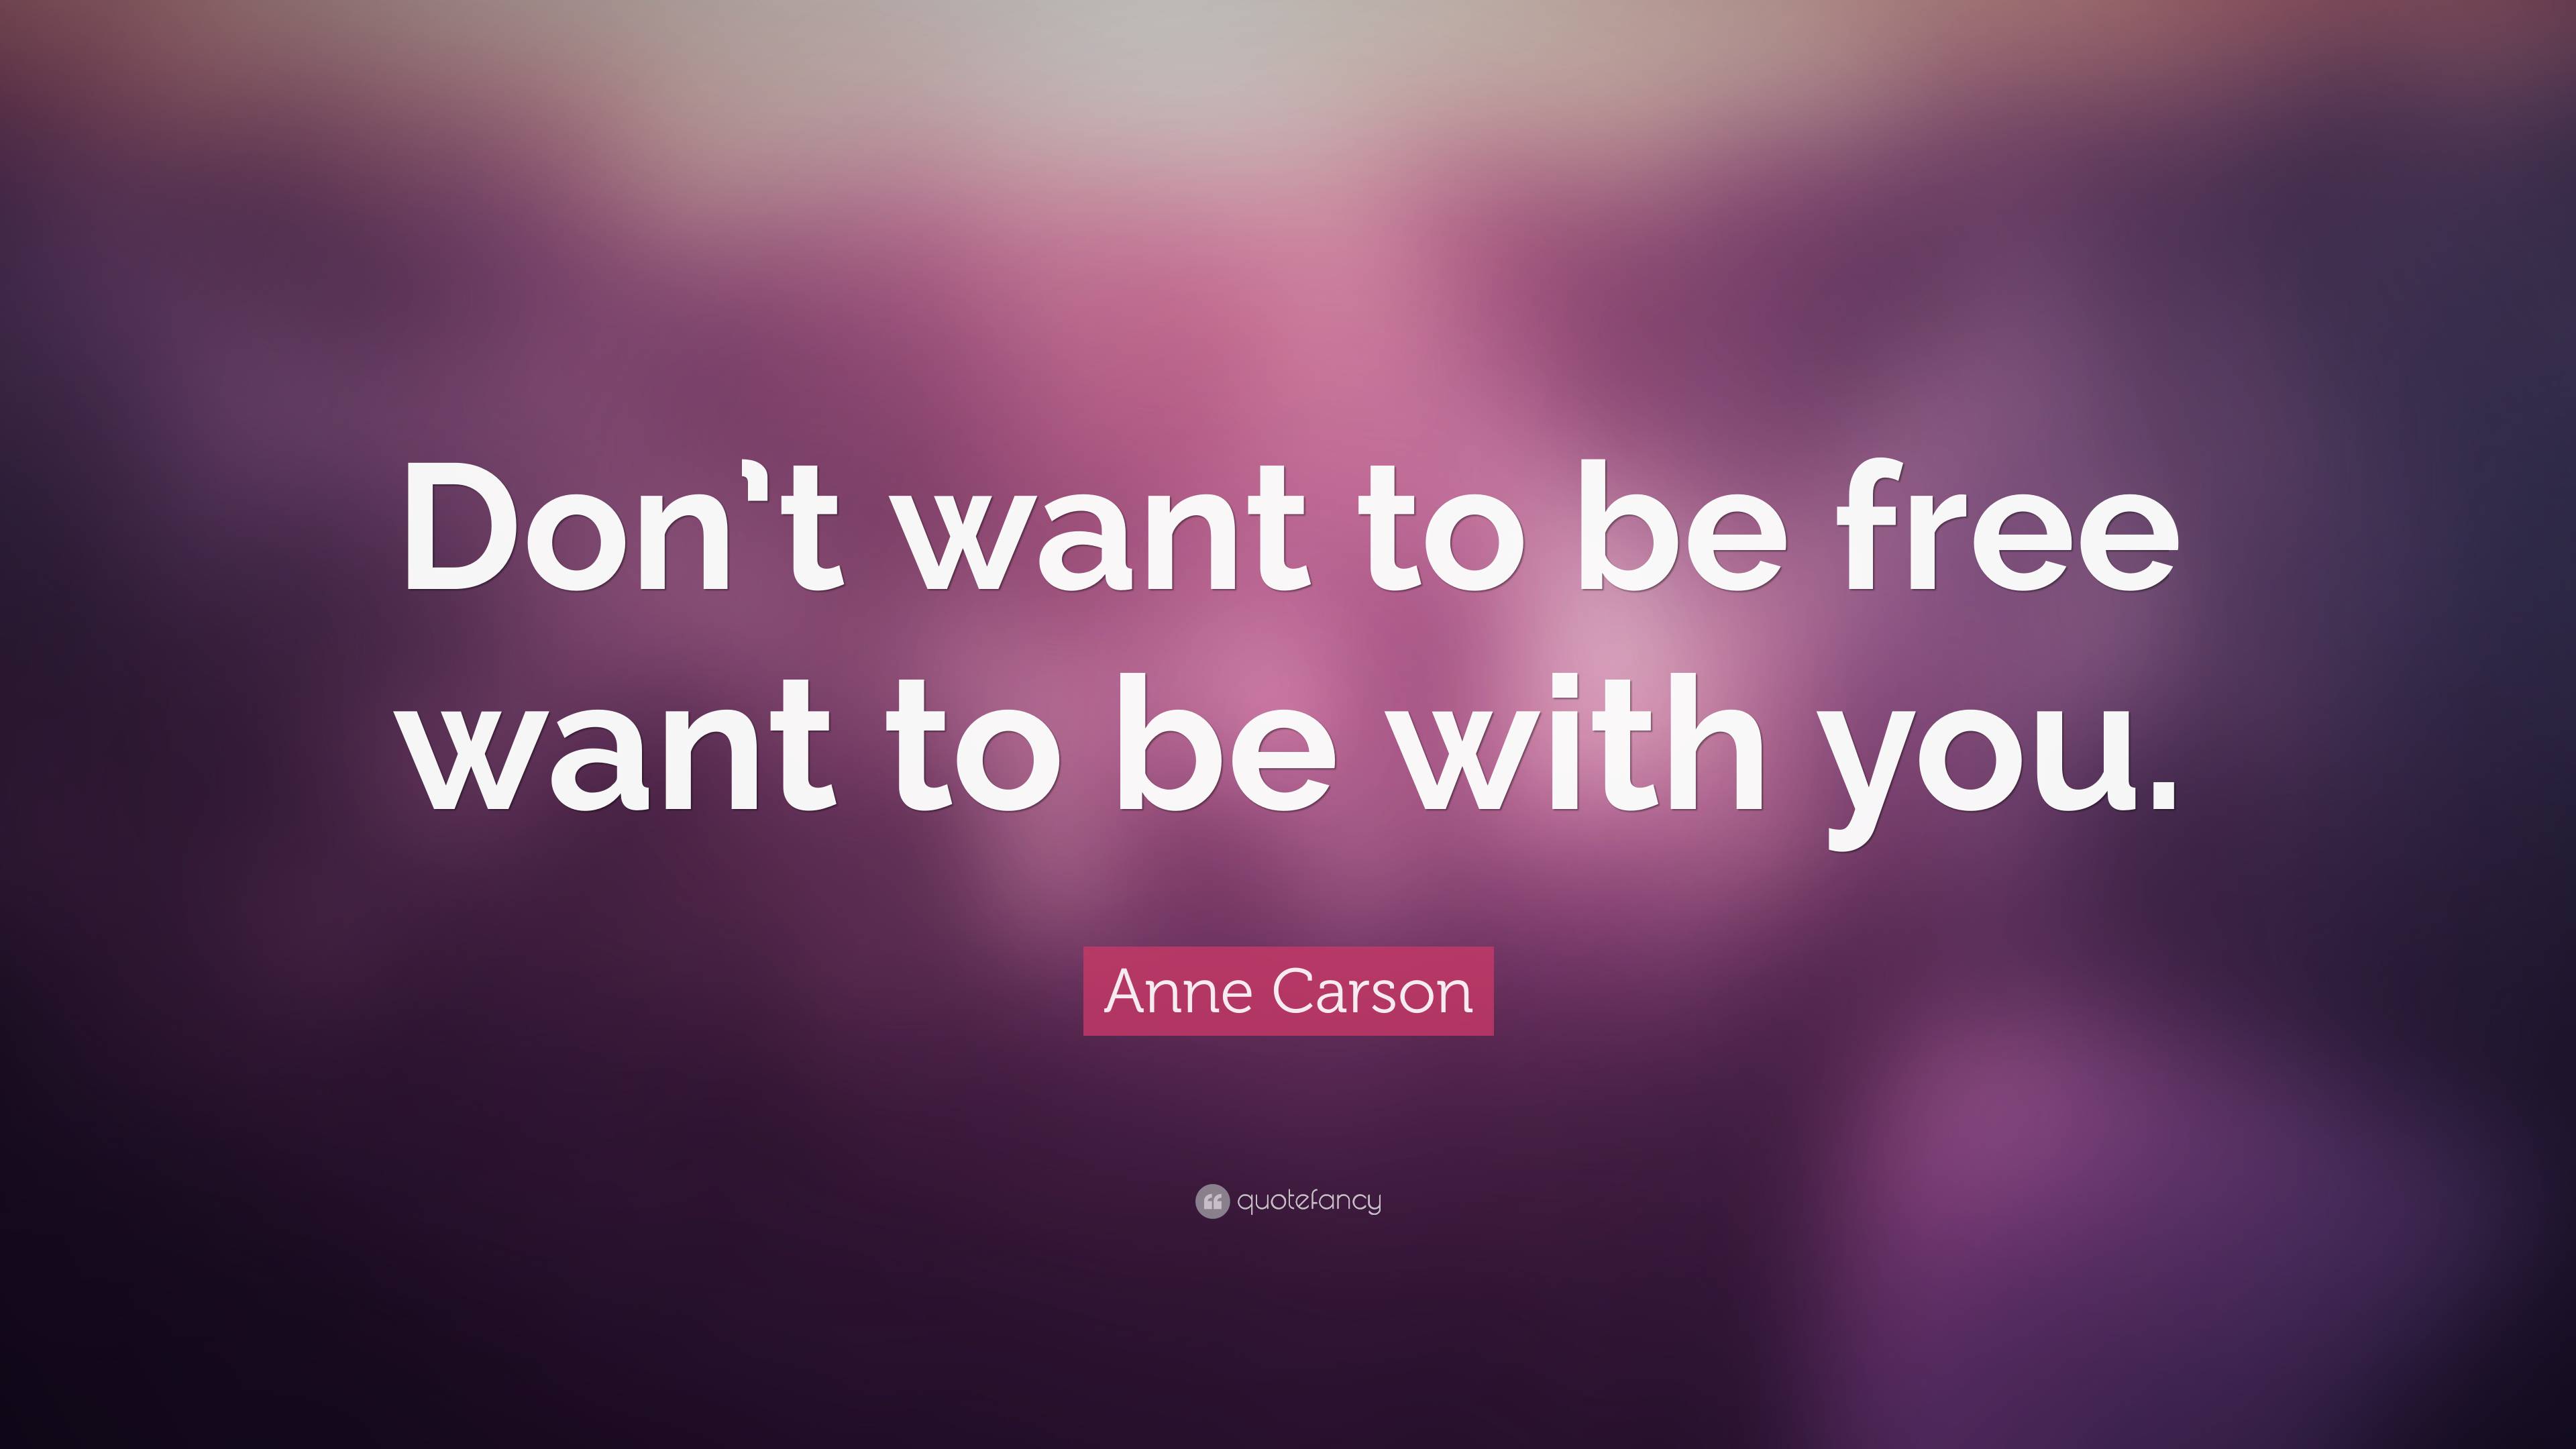 Anne Carson Quote: “Don’t want to be free want to be with you.”